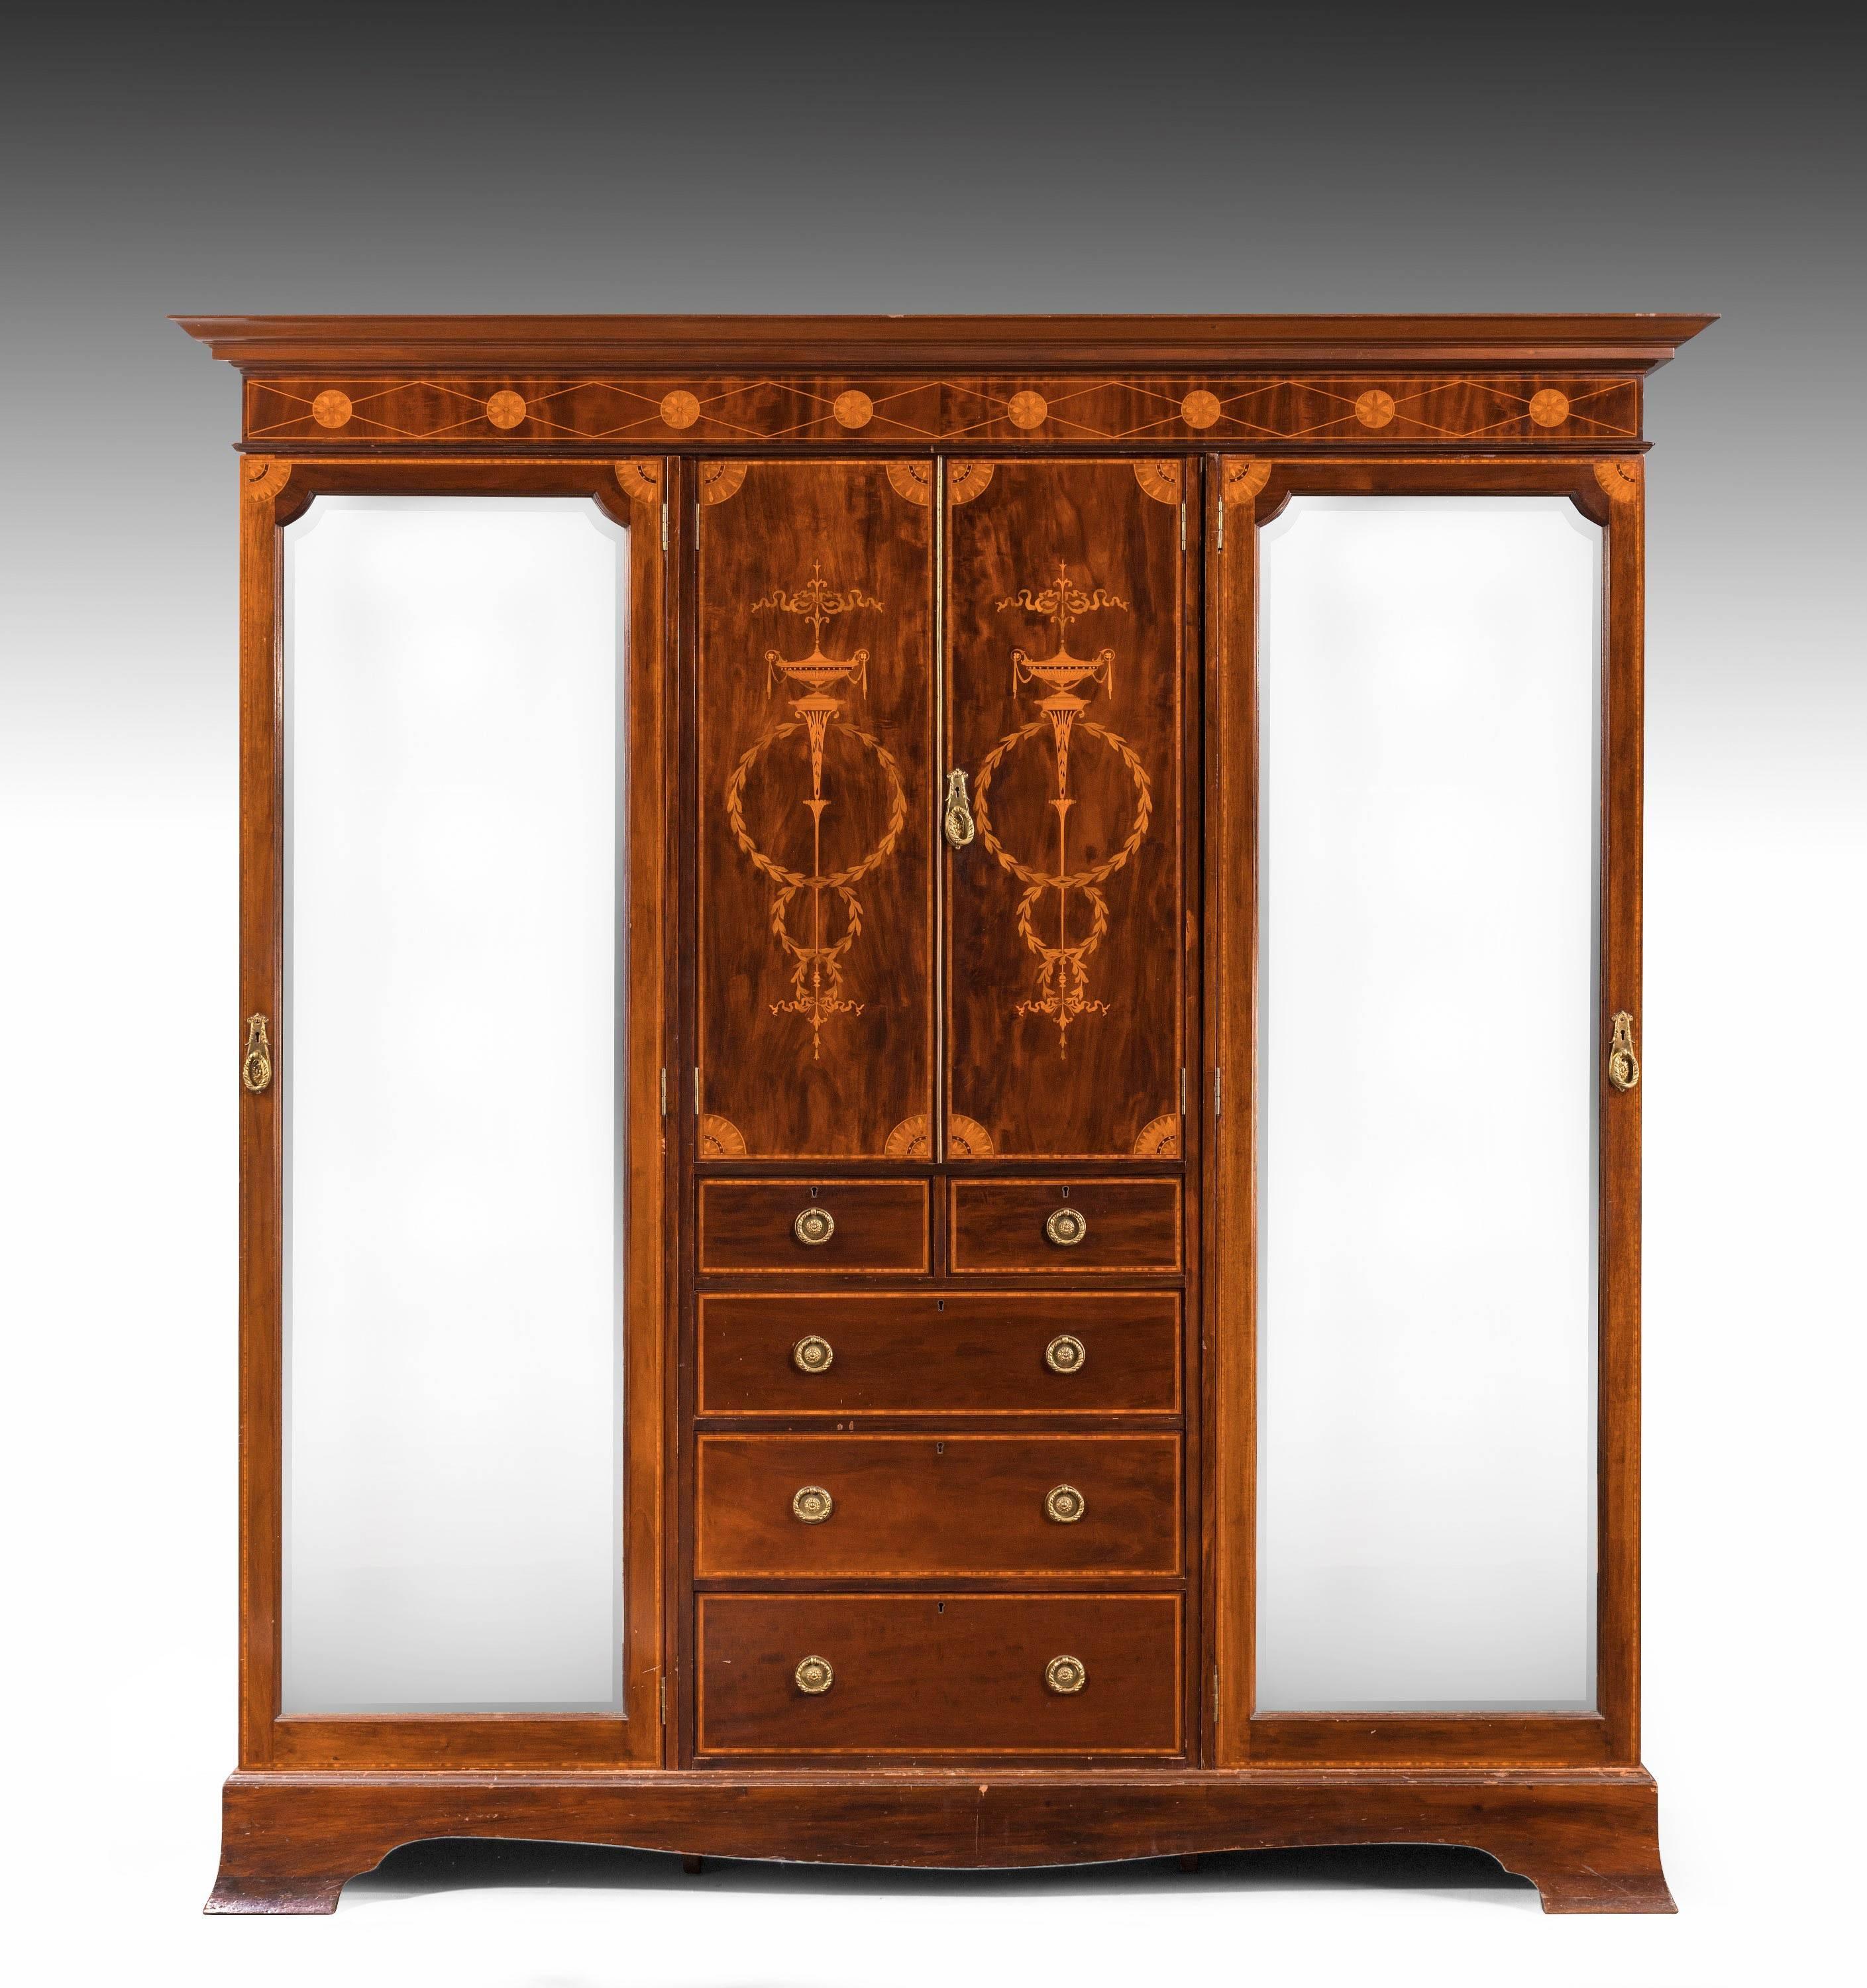 An attractive Sheraton style mahogany wardrobe. The doors fully mirrored with bevelled edges. The central part of the cupboard over five graduated drawers. Boxwood and satinwood inlay of marquetry and parquetry design.